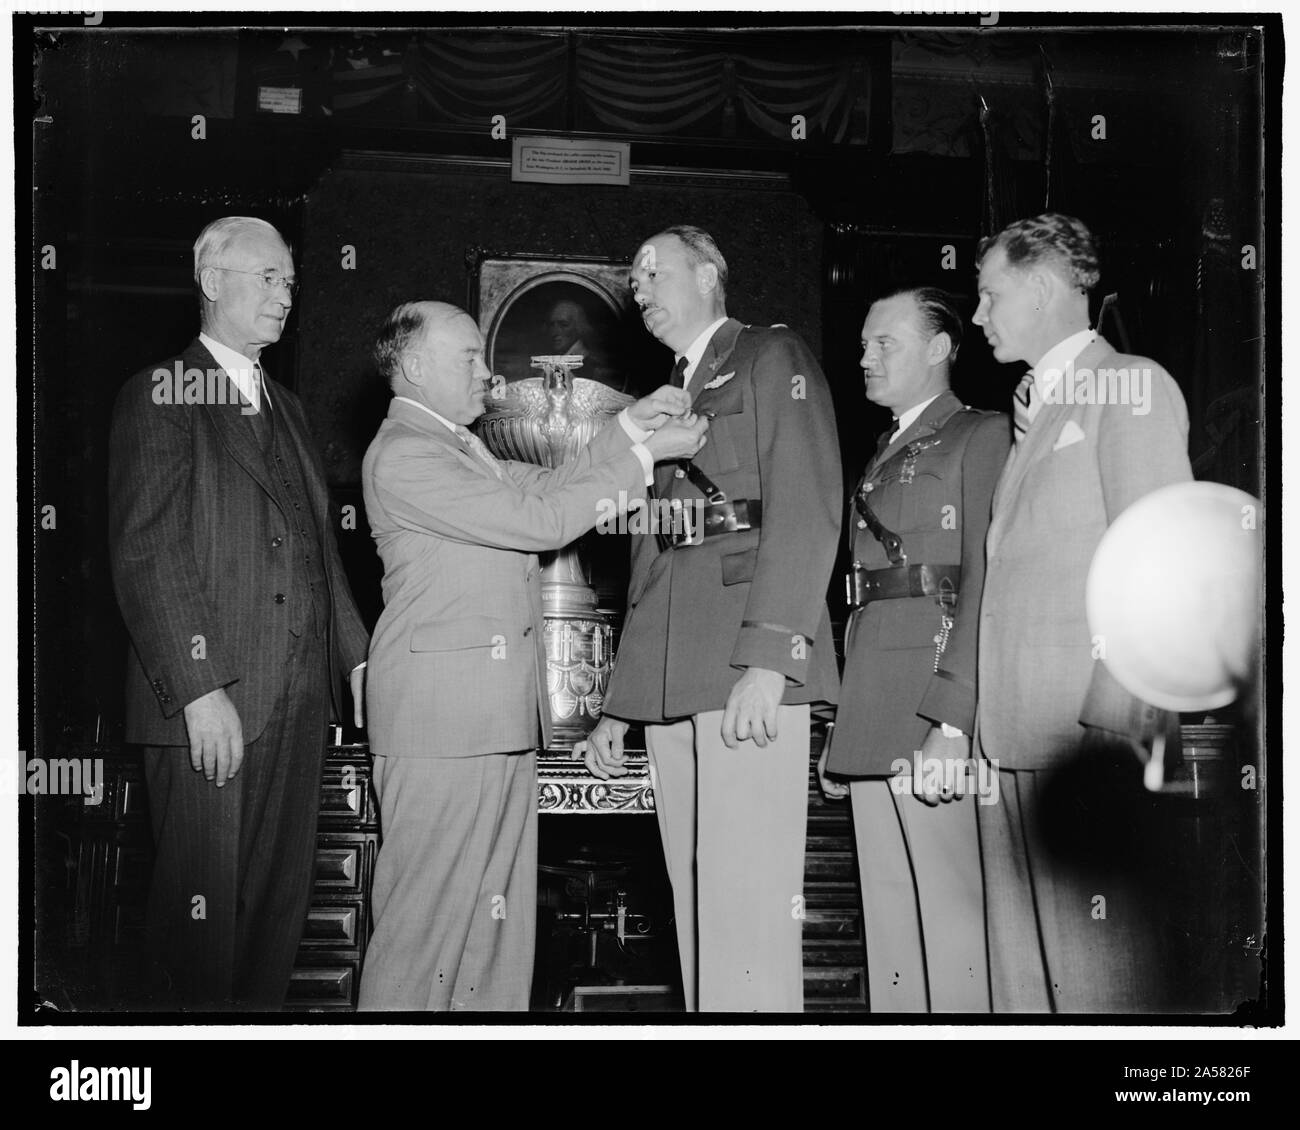 War Secretary presents Army Flyers with Mackay Trophy. Washington, D.C., Oct. 14. As a reward for their development and demonstration of the original automatic landing device for aircraft, Captains Carl J. Crane and George V. Holloman, U.S. Army Air Corps, were today presented with the MacKay trophy for 1937 by Secretary of War Harry H. Woodring. Gold medals, emblematic of the trophy were presented the Flyers at the same time. Left to right: Charles F. Horner, Chairman of the National Aeronautic Association Stock Photo